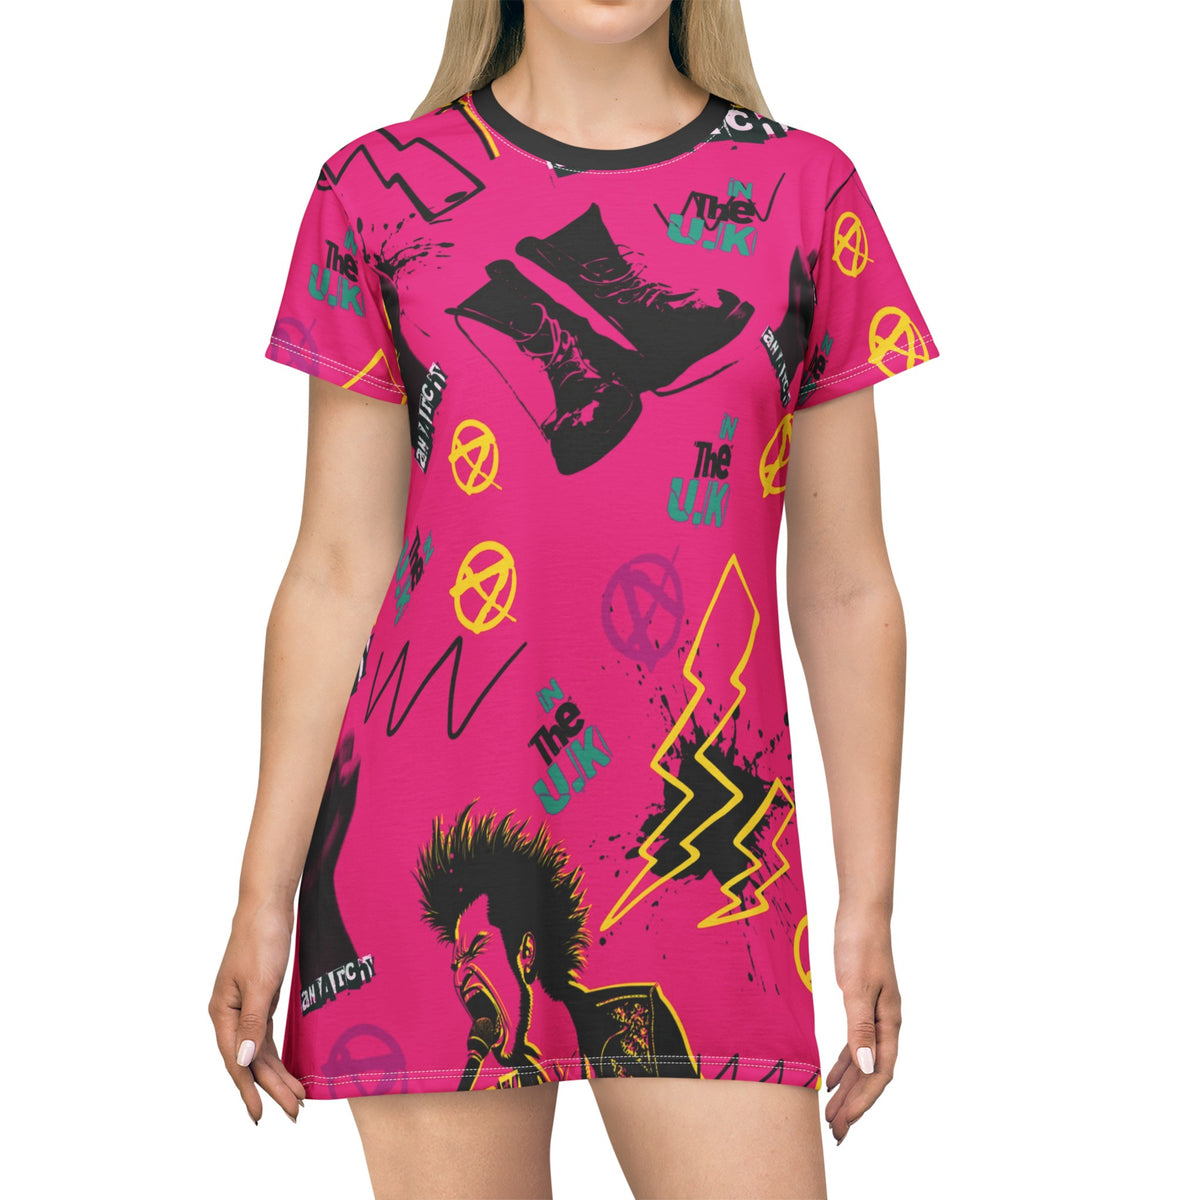 Anarchy in Pink in The UK - T-Shirt Dress (AOP)